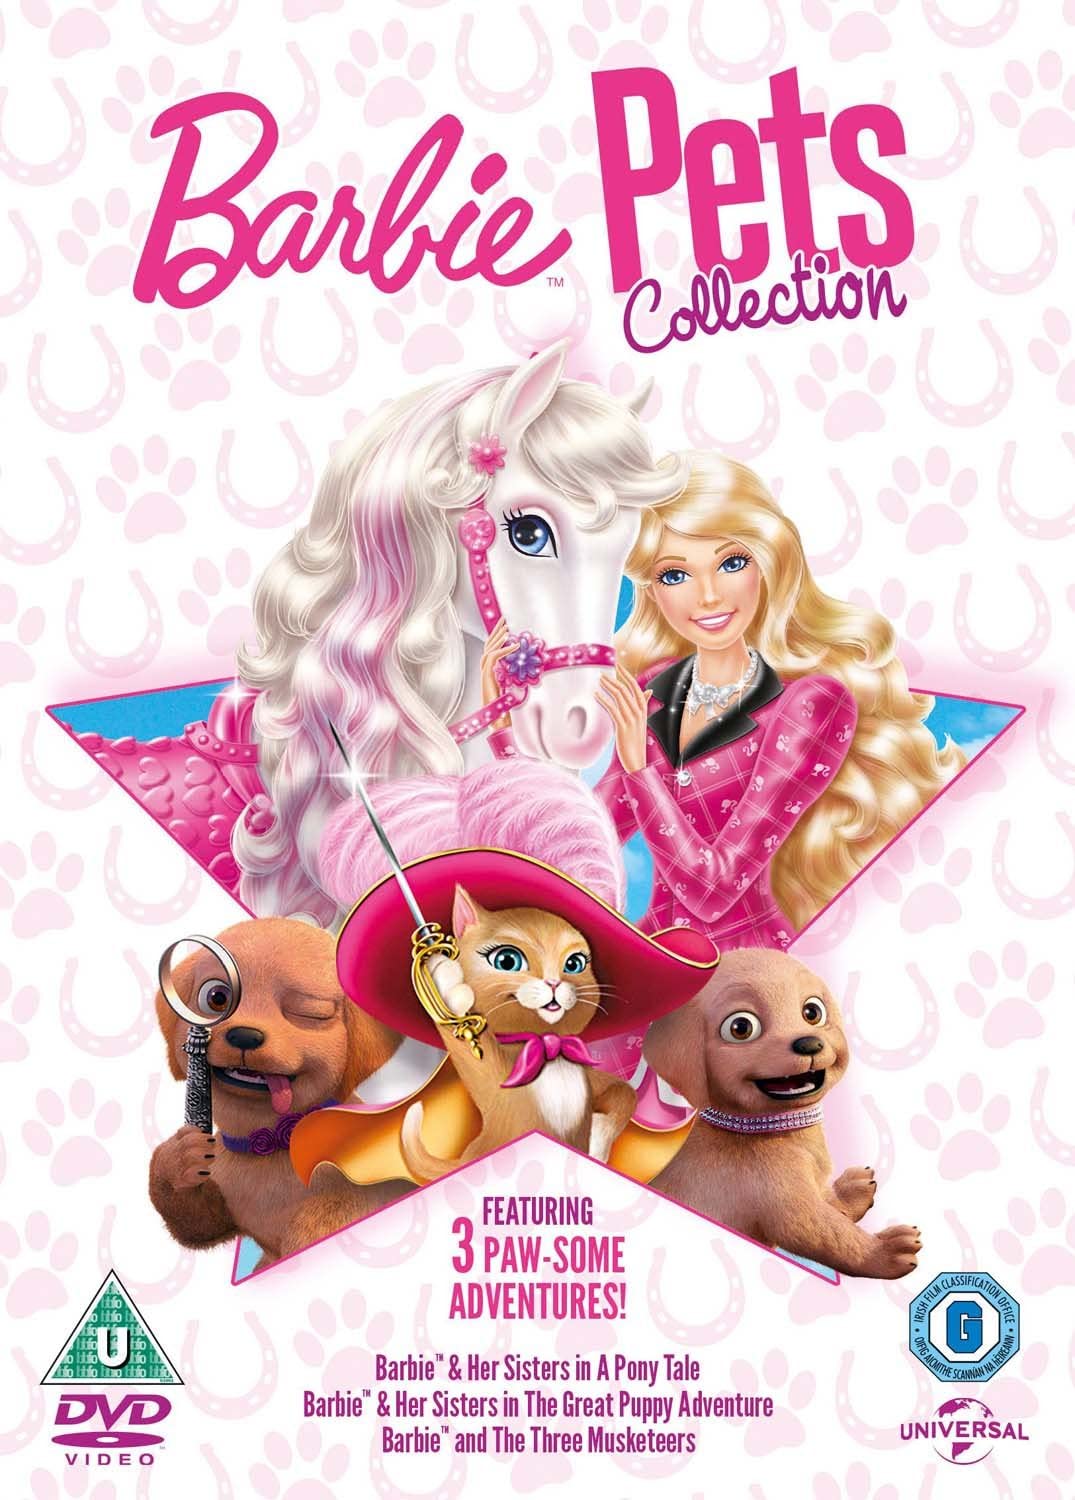 The Barbie Pets Collection [2016] [DVD]